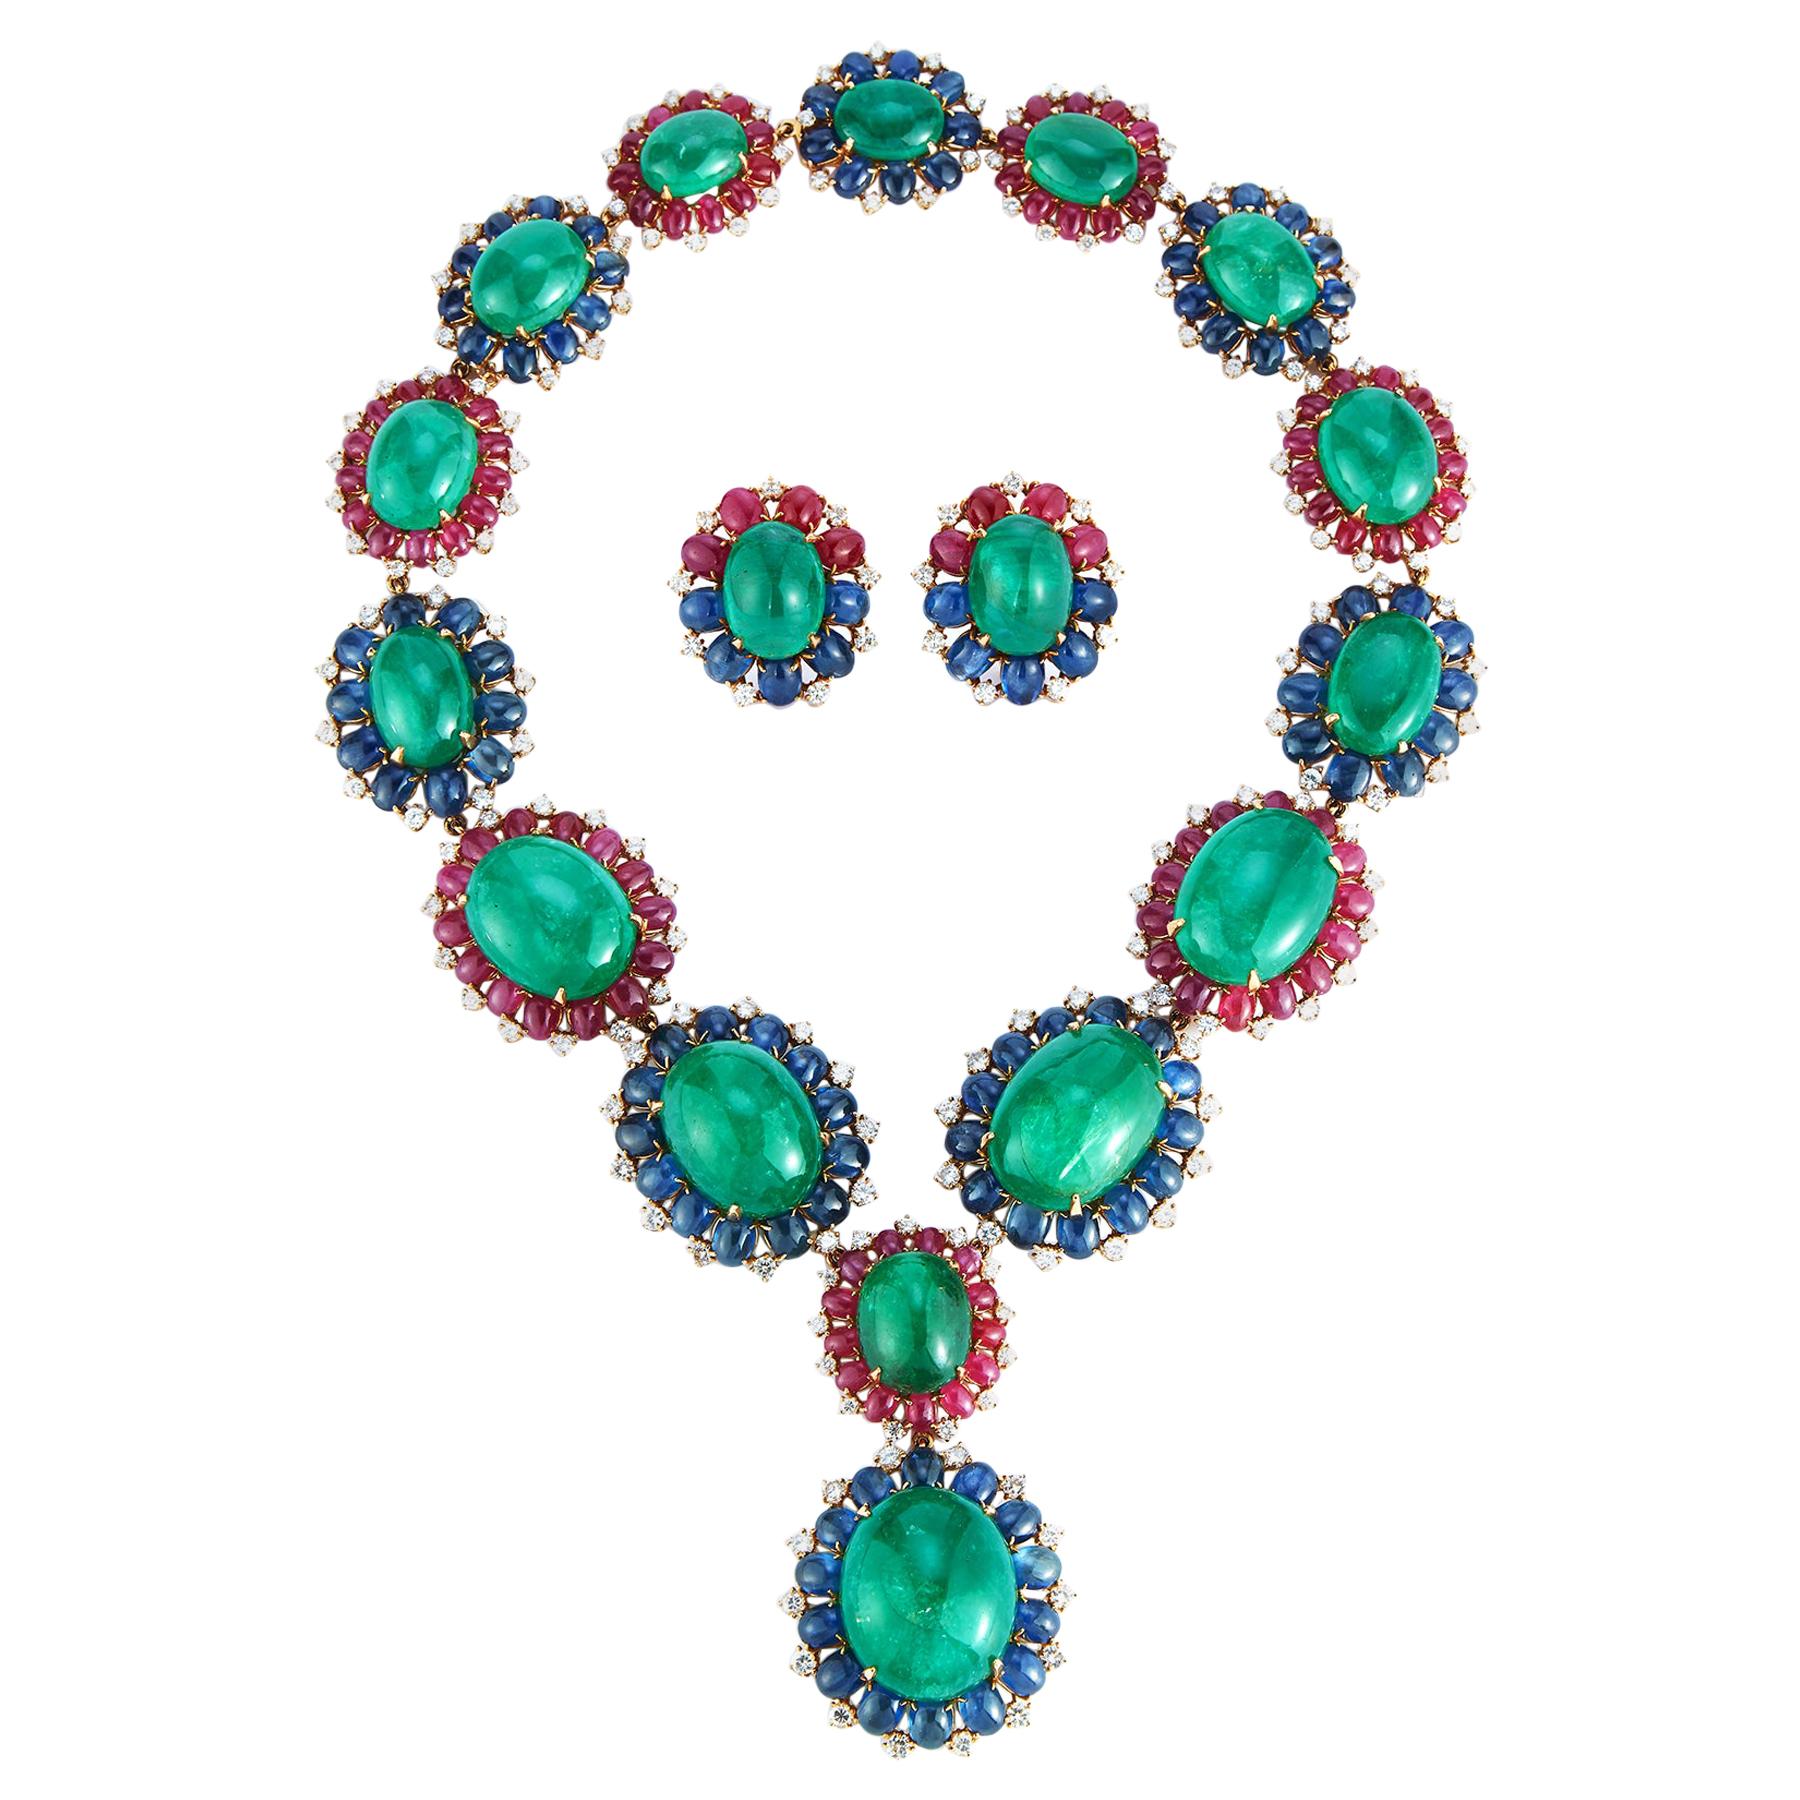 Bvlgari Emerald Necklace and Earrings Set